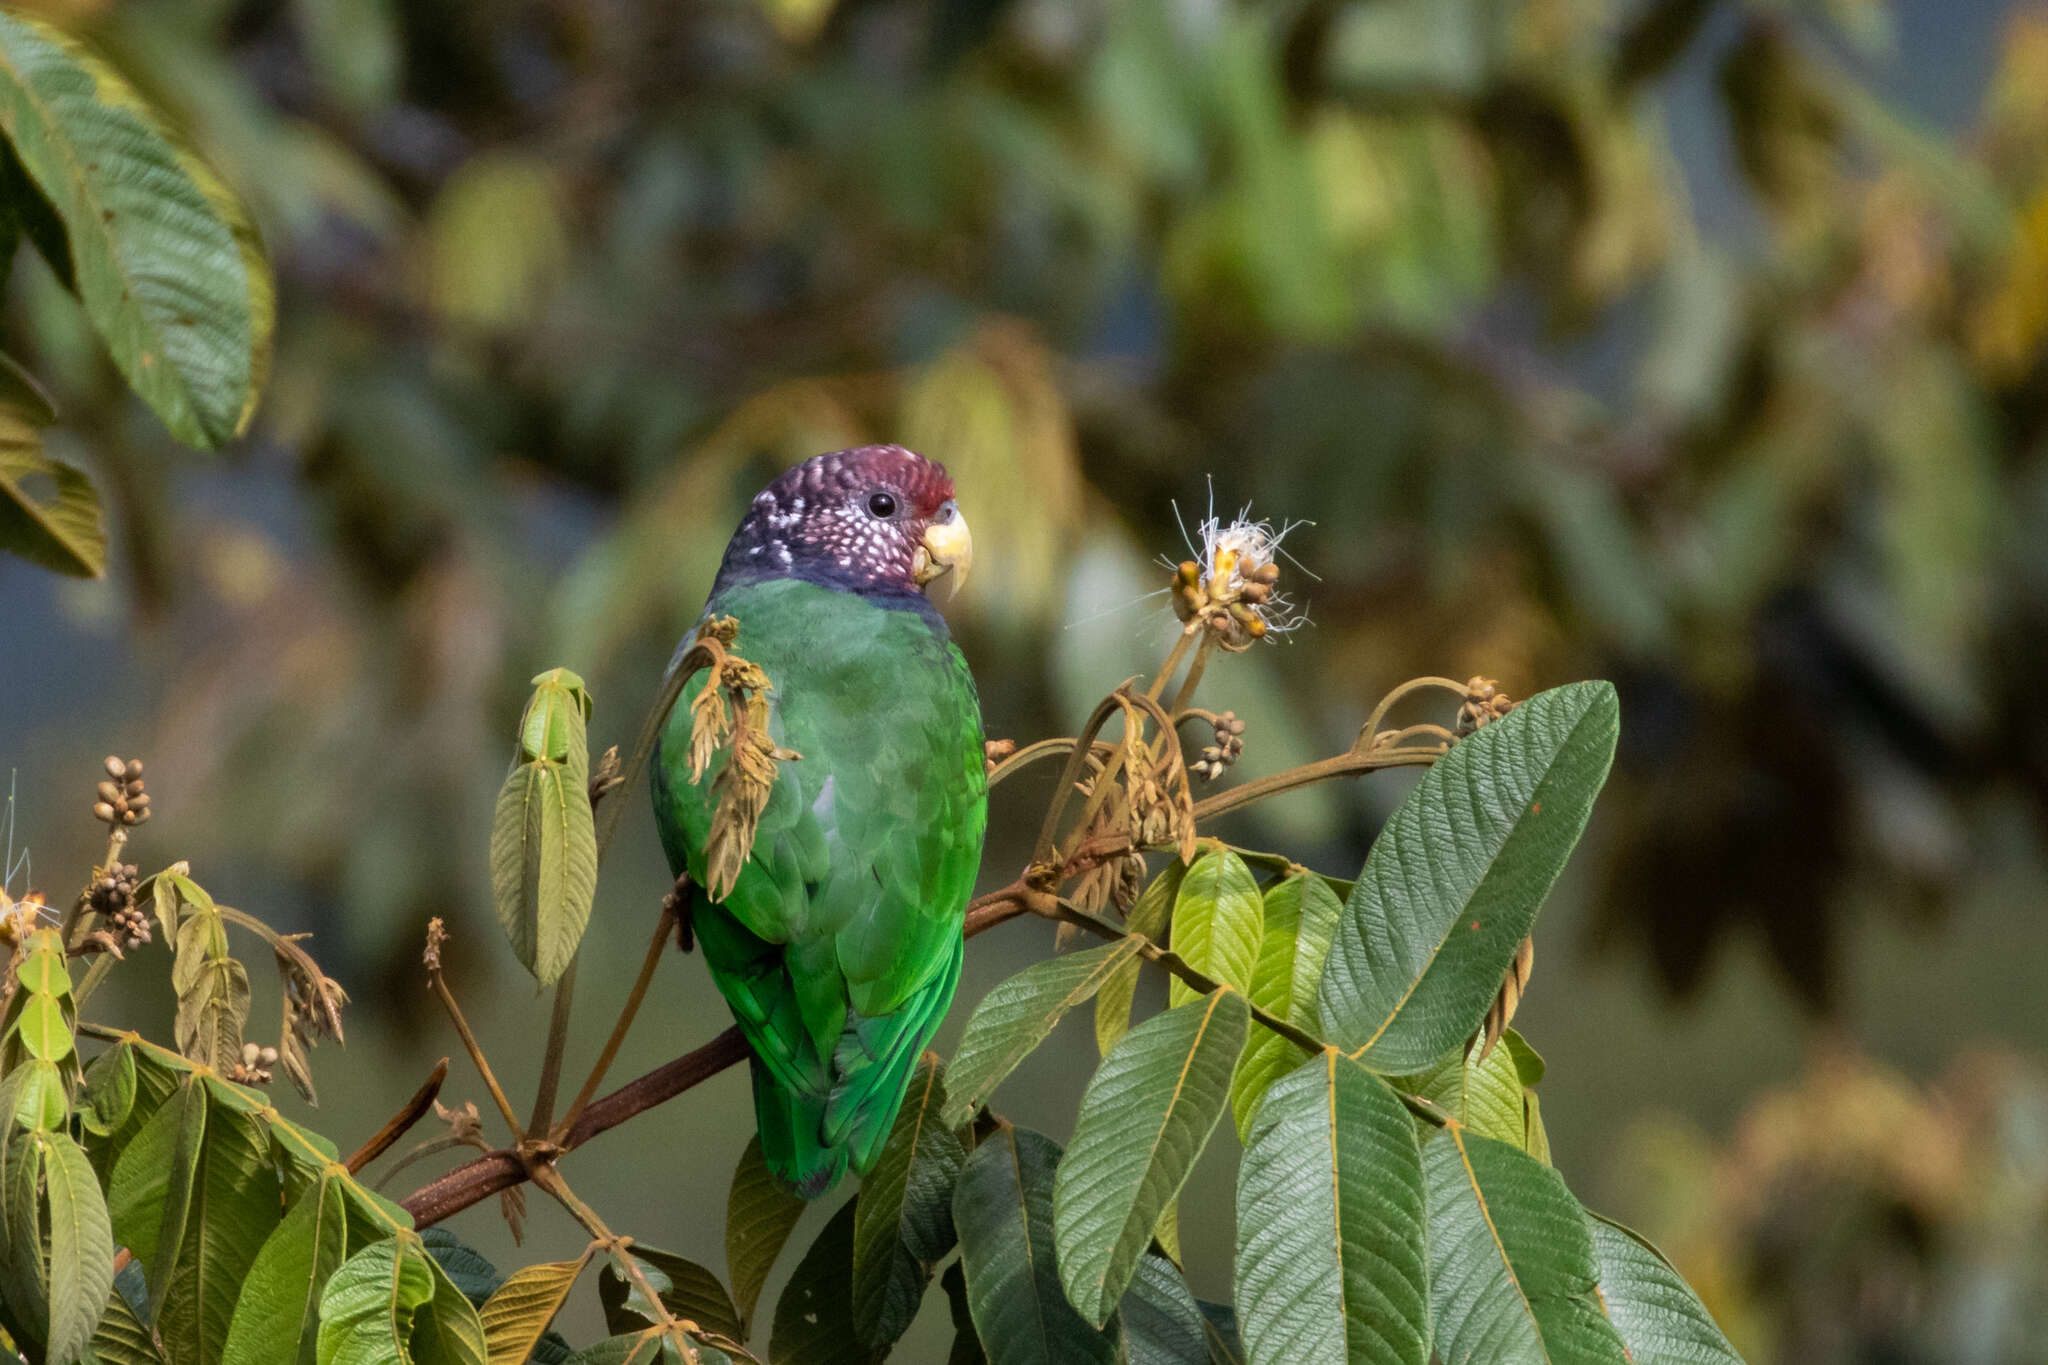 Image of Speckle-faced Parrot